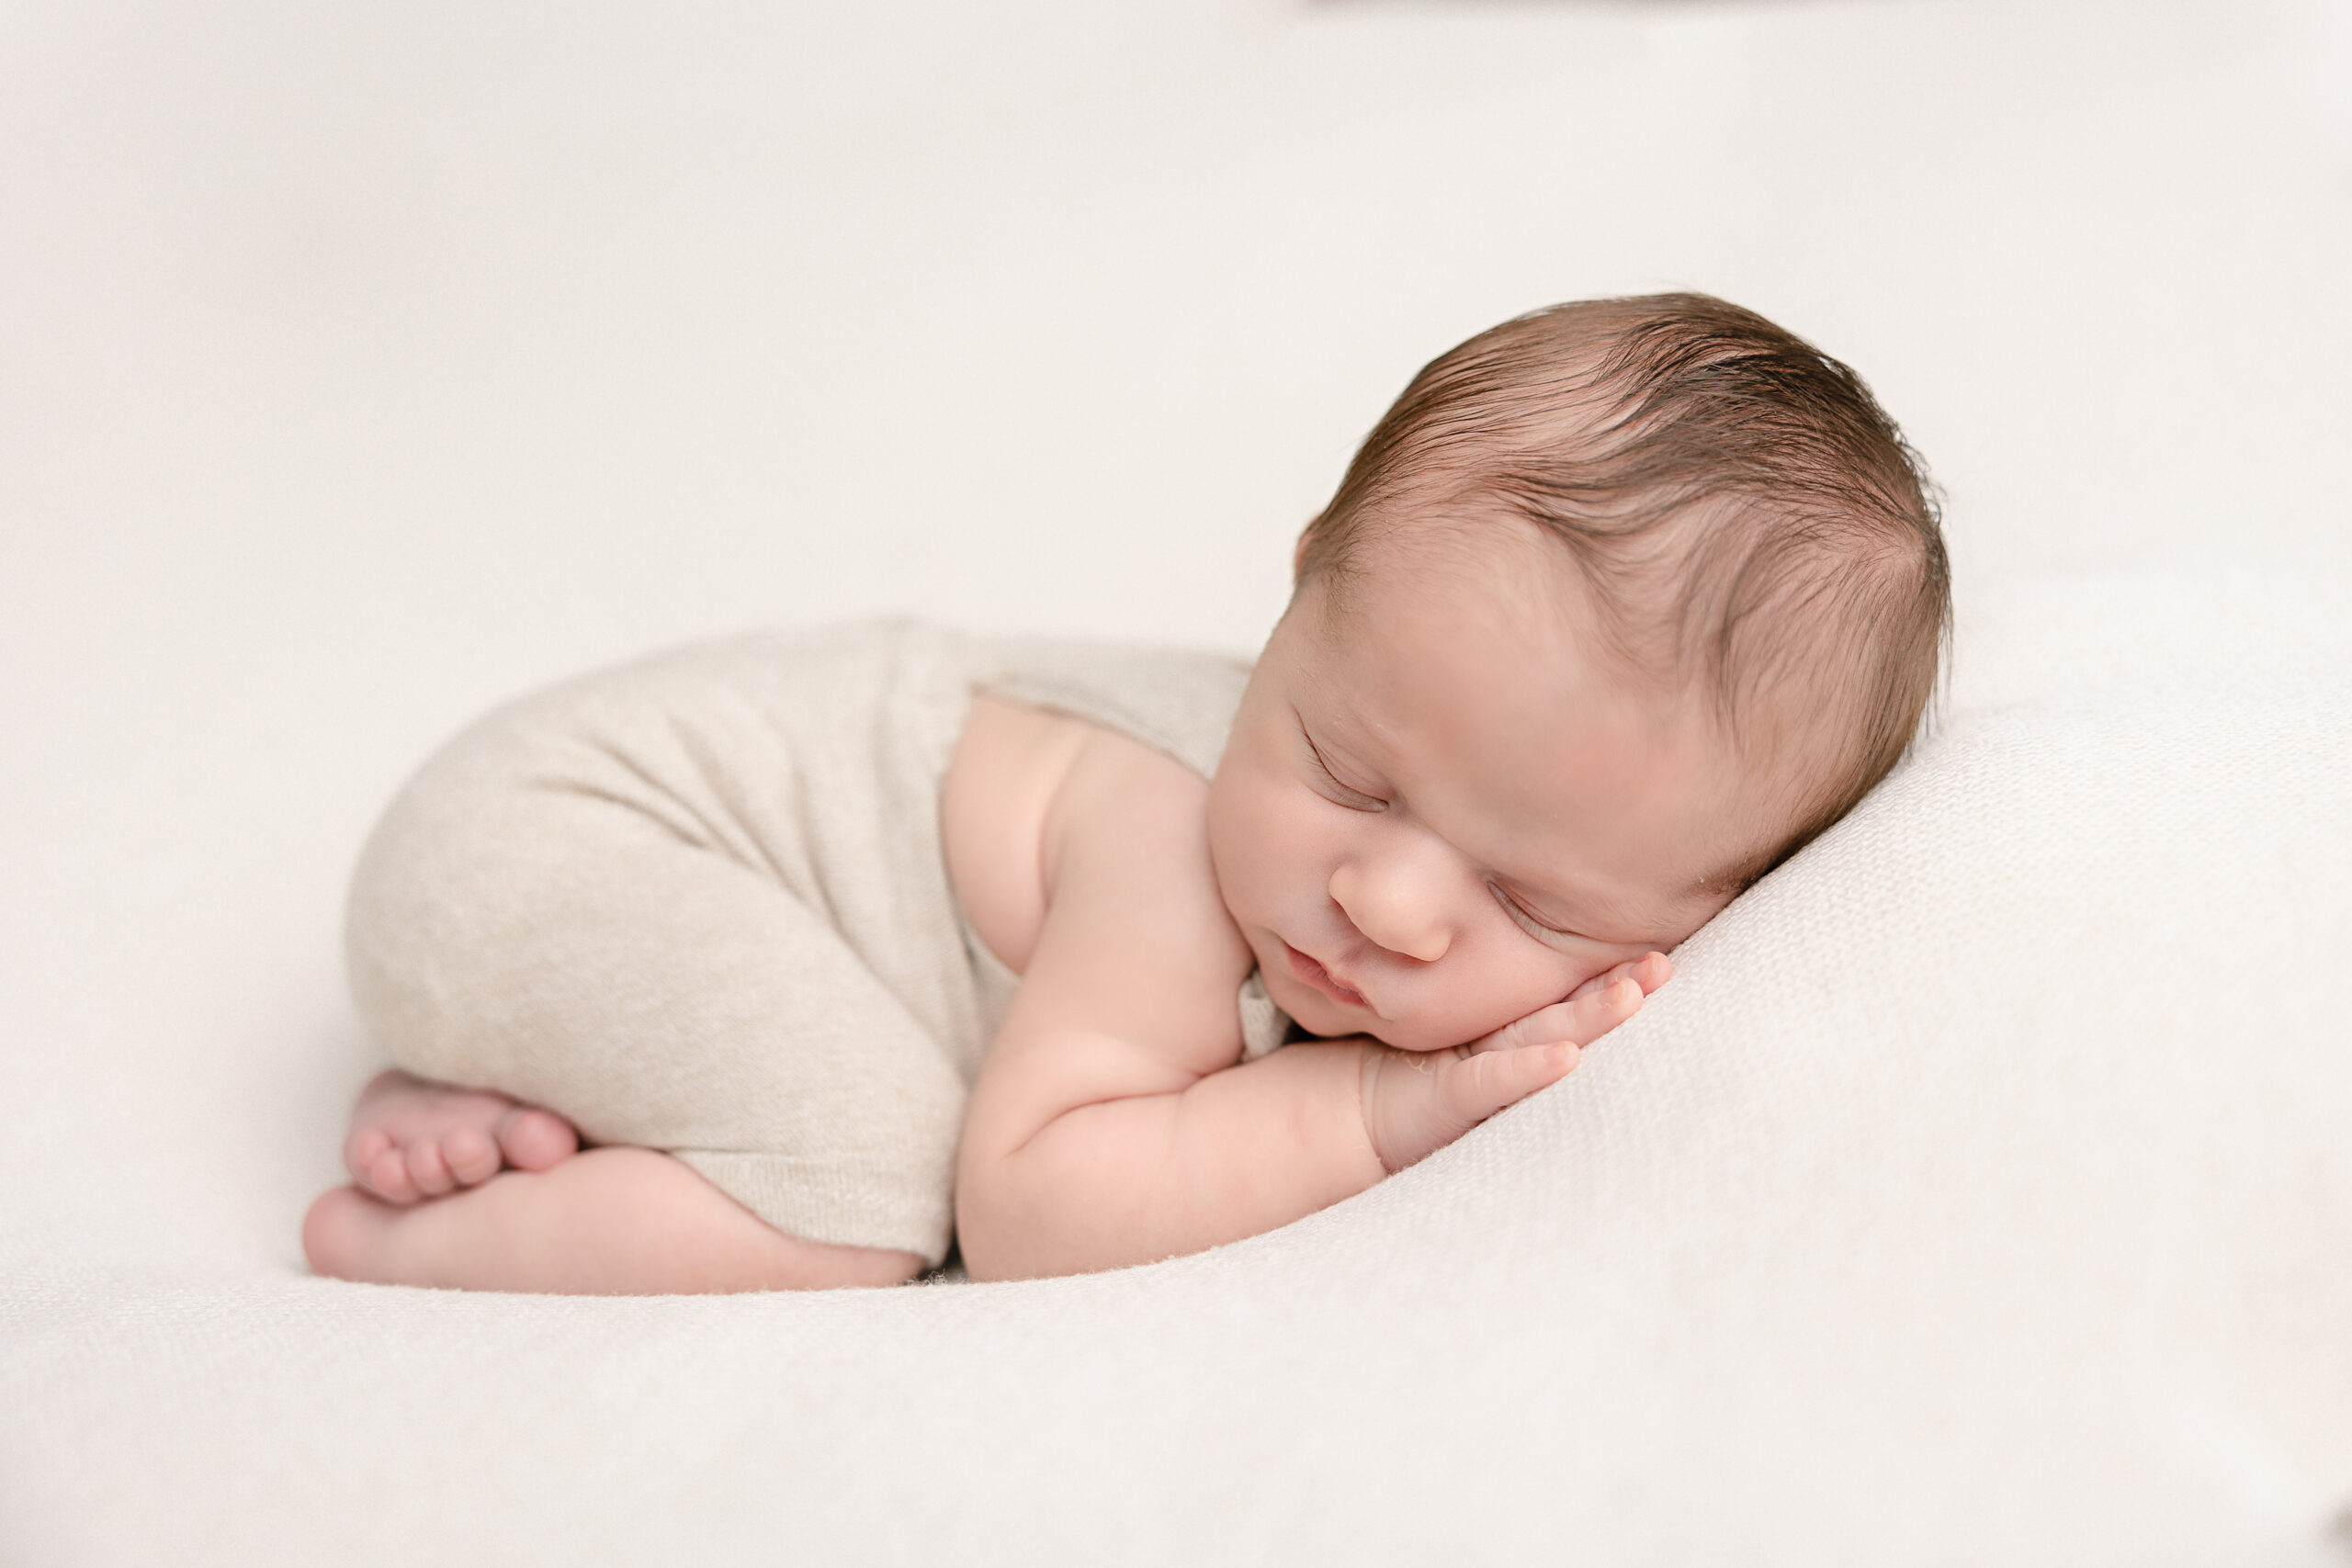 newborn baby in neutral clothing sleeping on his hands